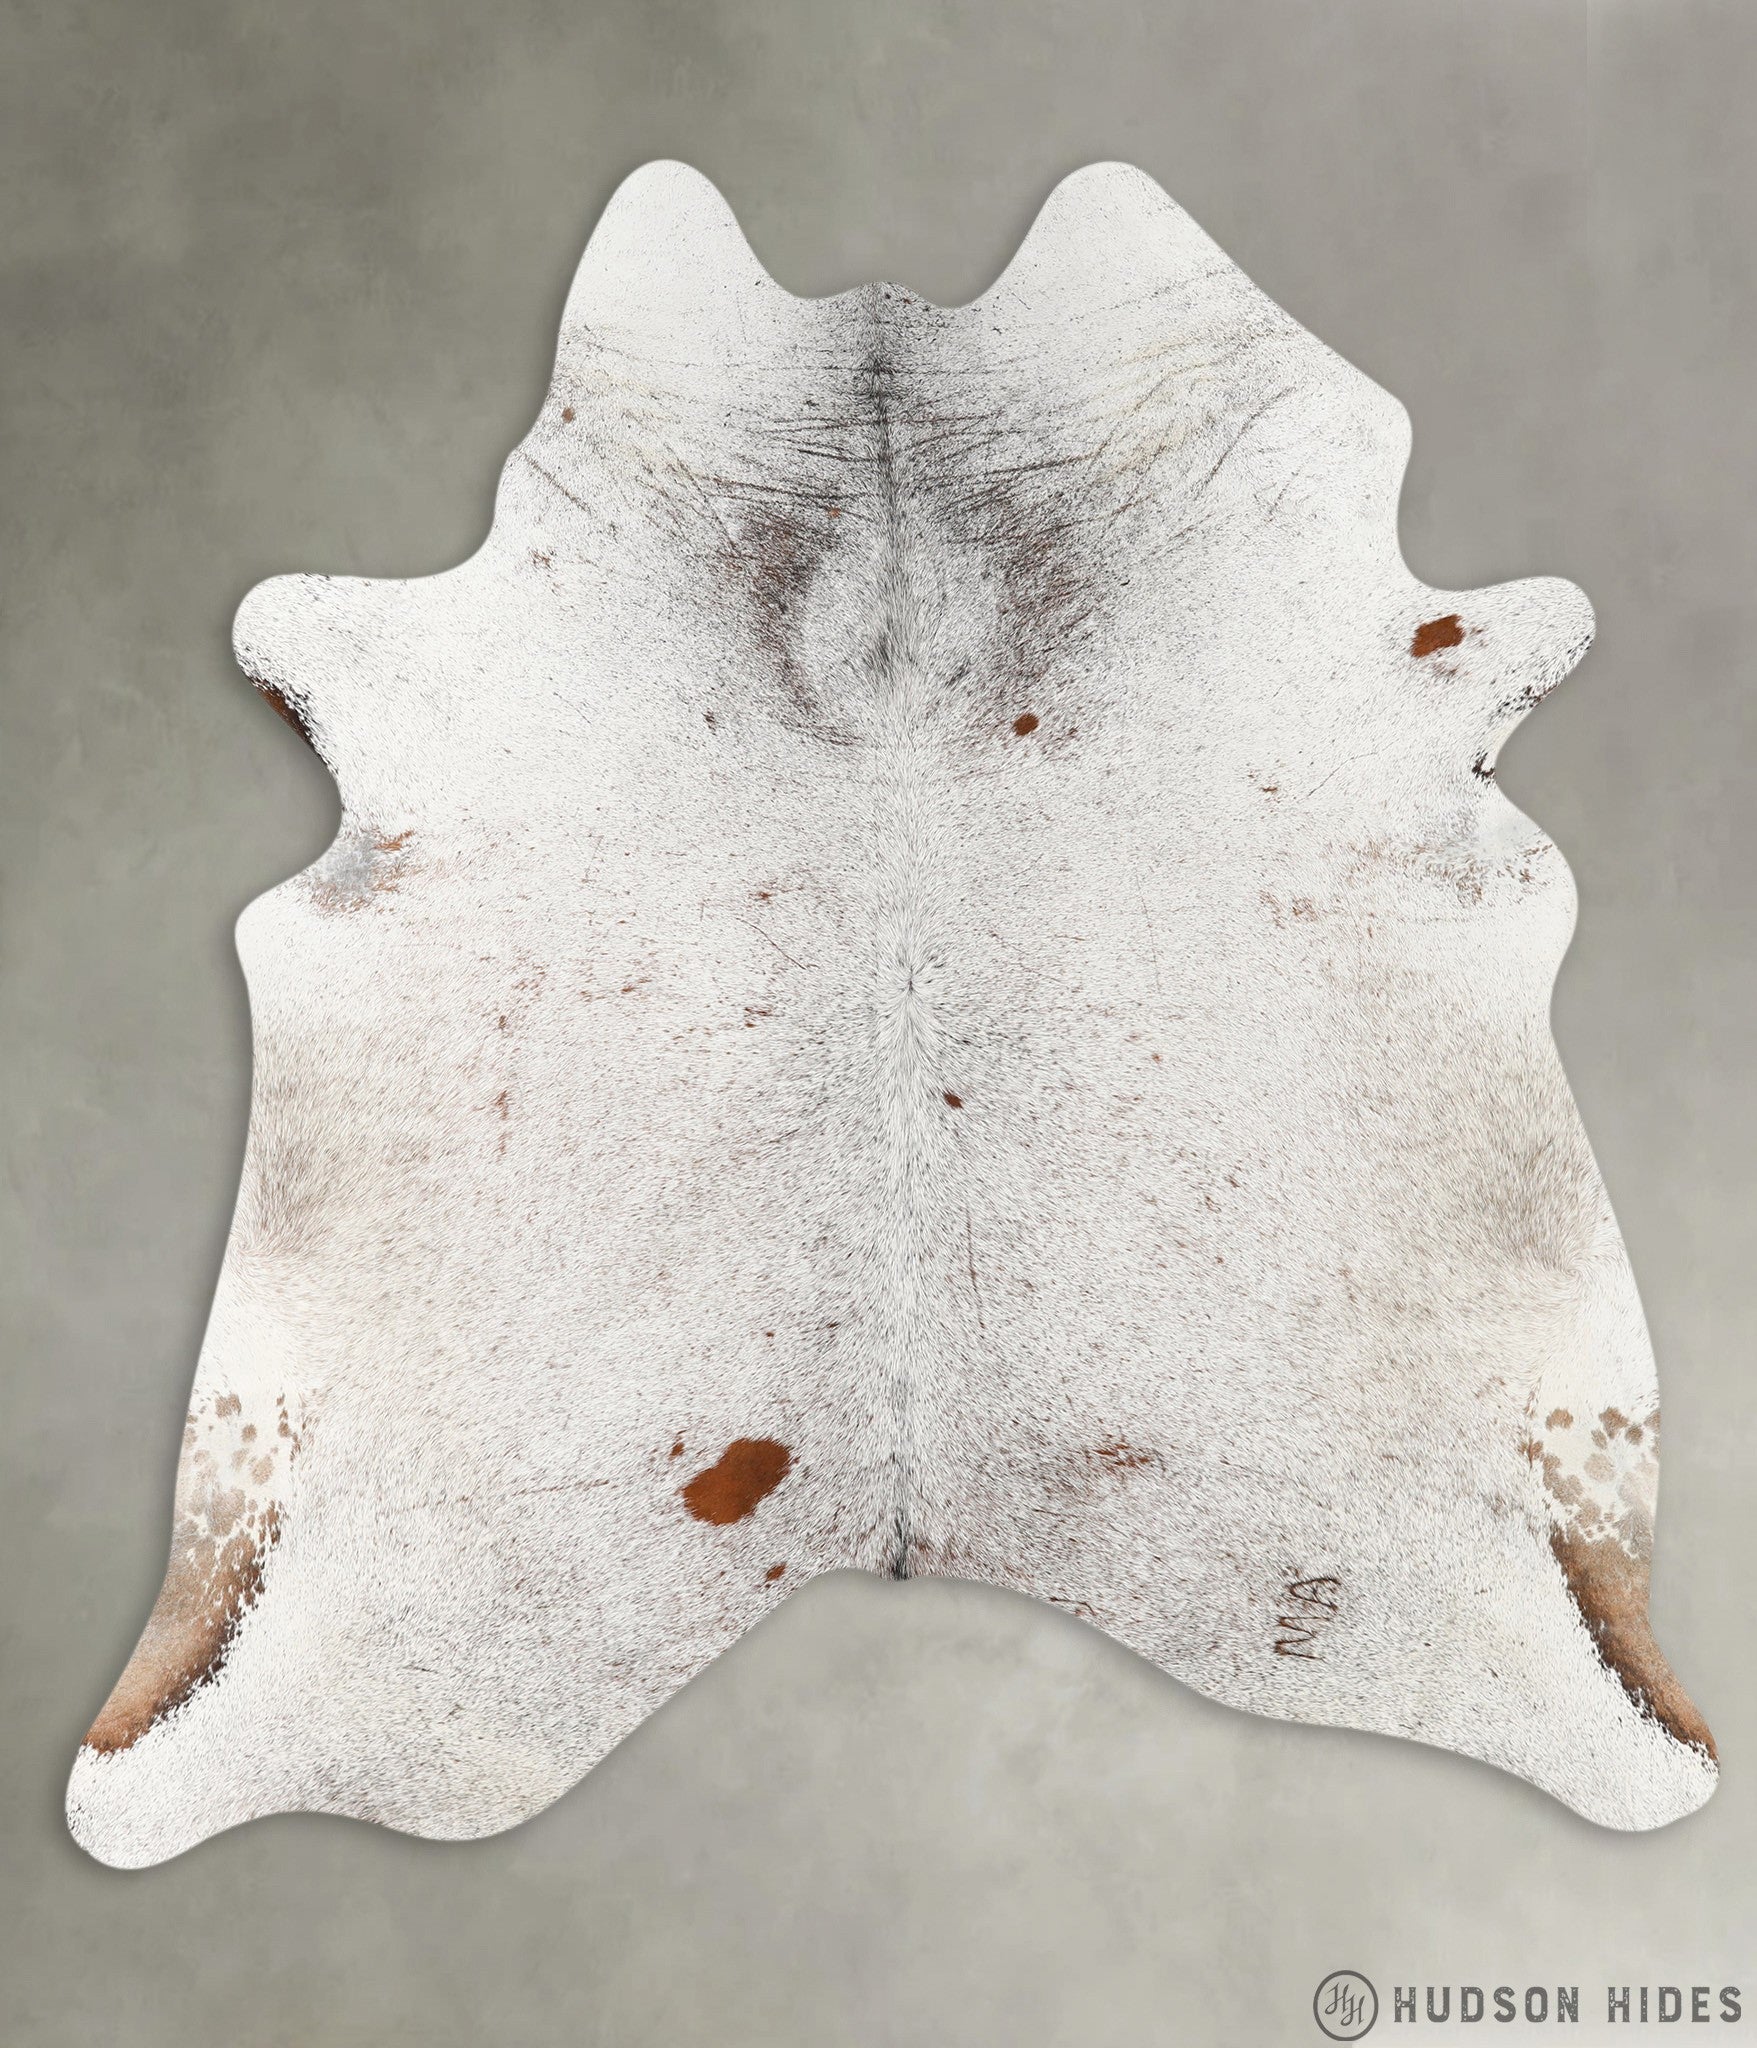 Salt and Pepper Brown XX-Large Brazilian Cowhide Rug 7'4"H x 7'1"W #22985 by Hudson Hides